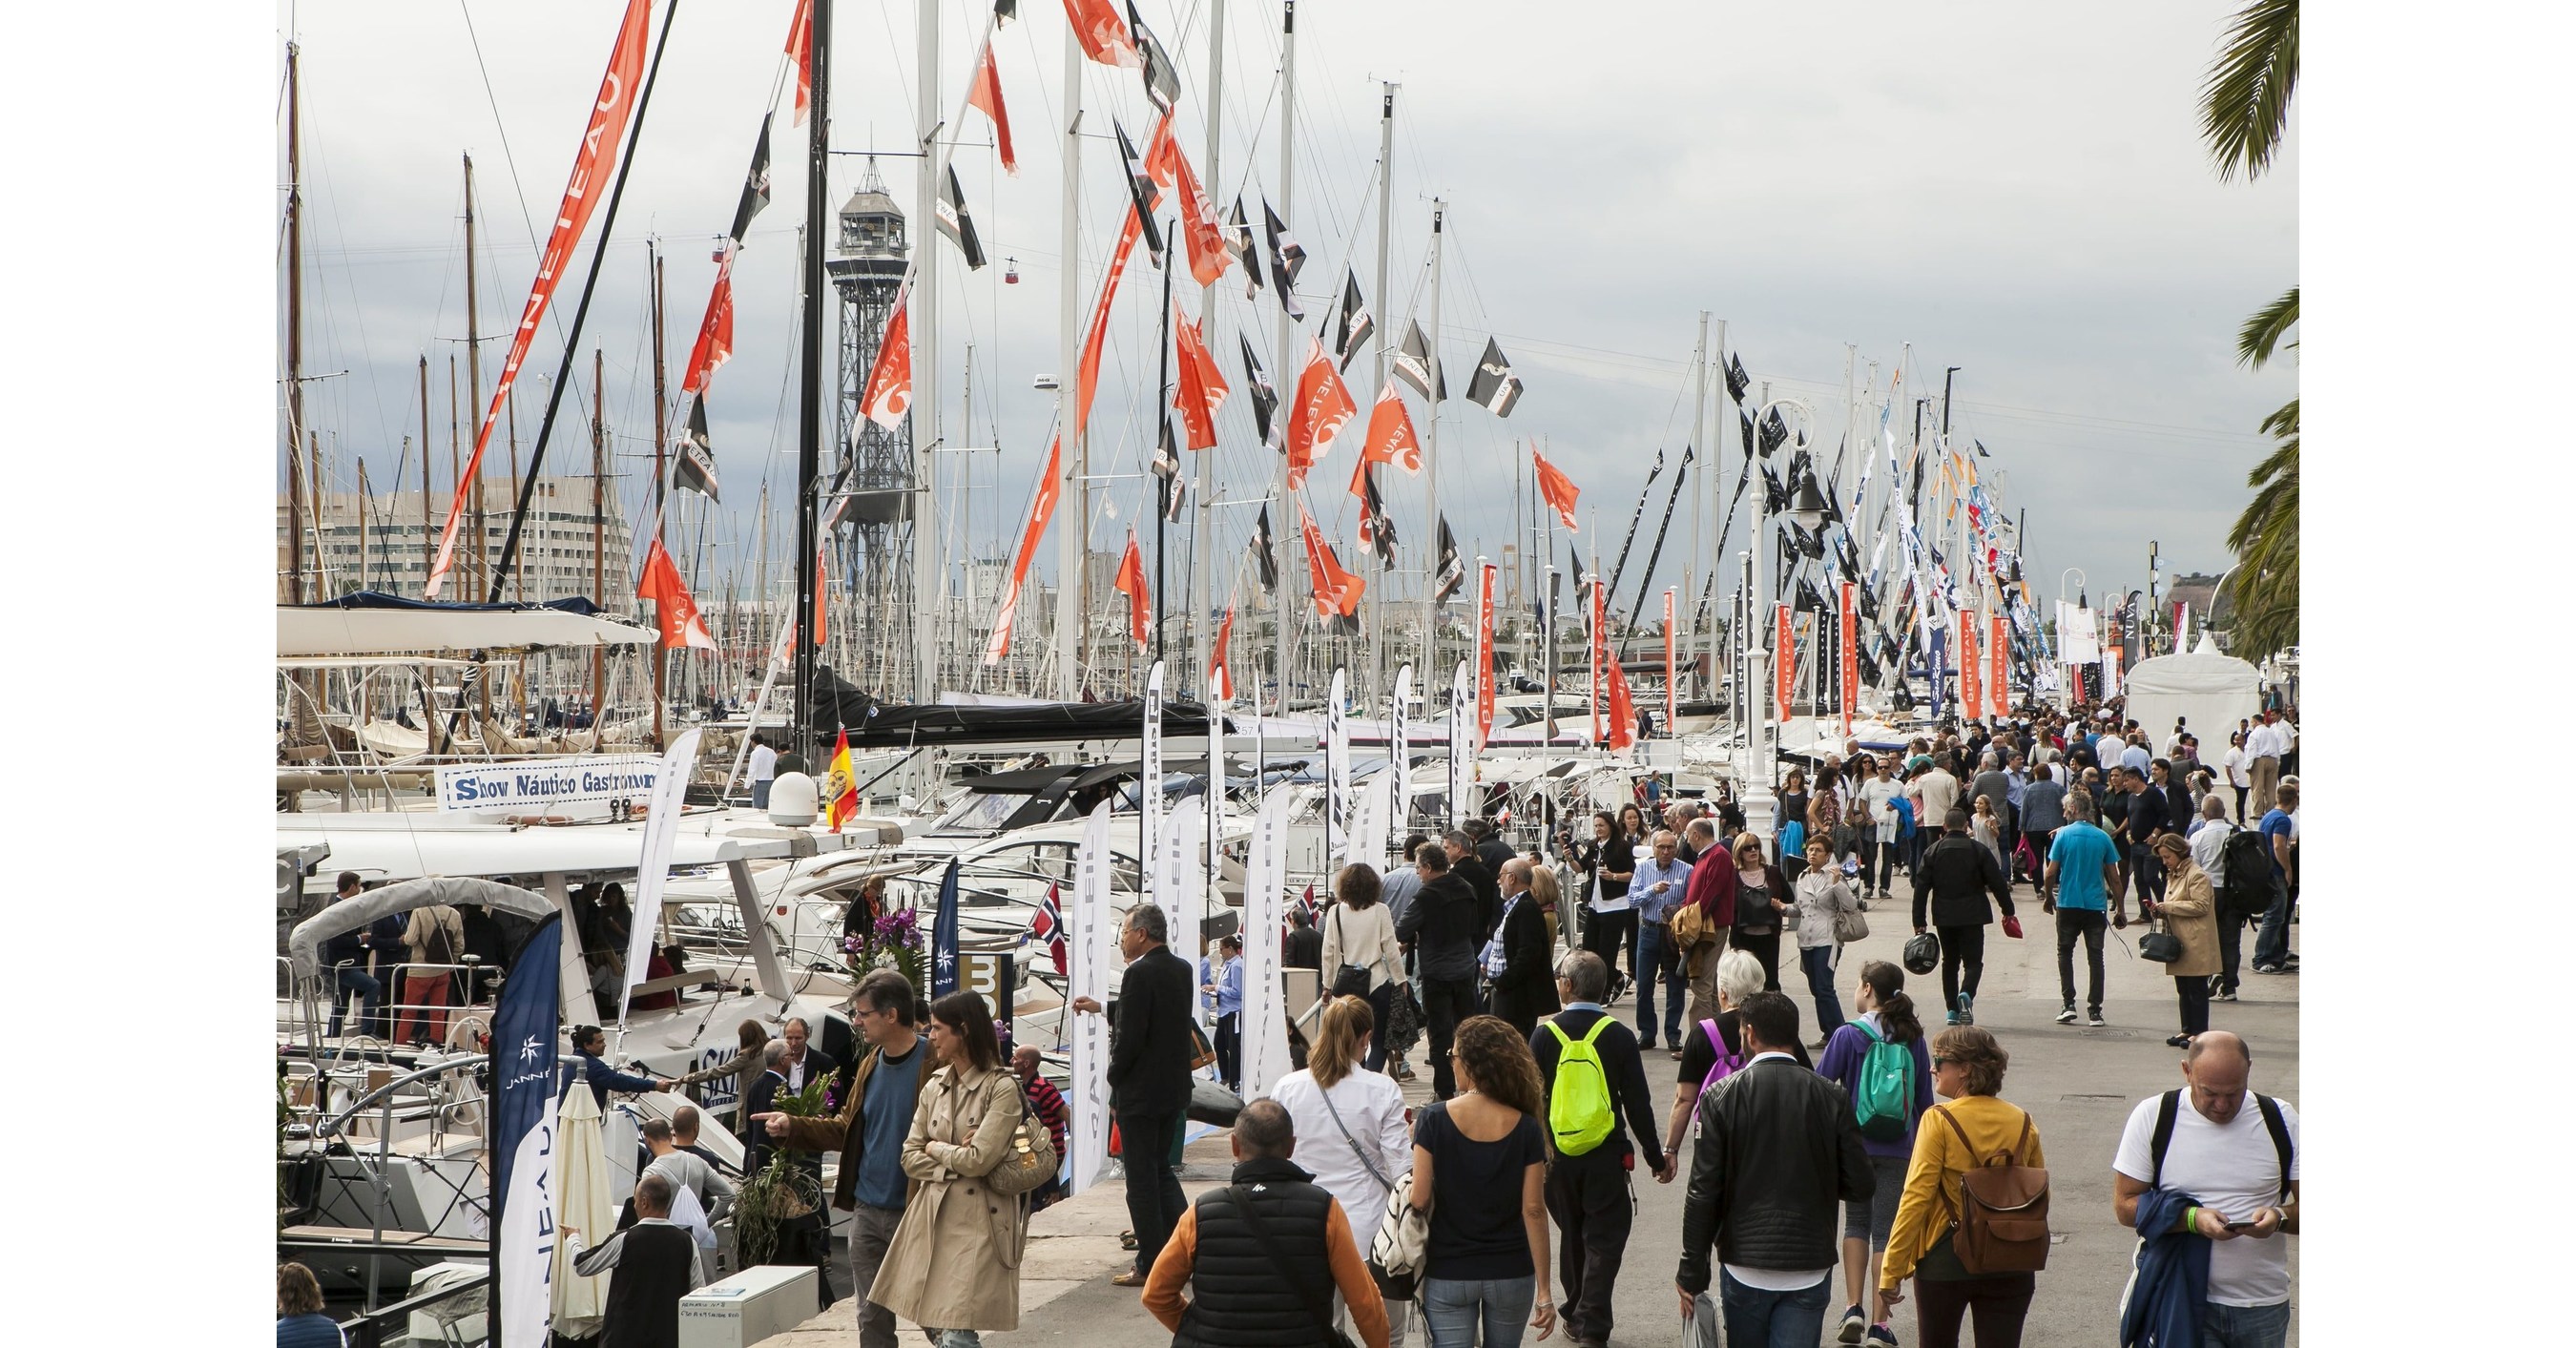 Fira de Barcelona The Barcelona Boat Show Sells Out All the Available